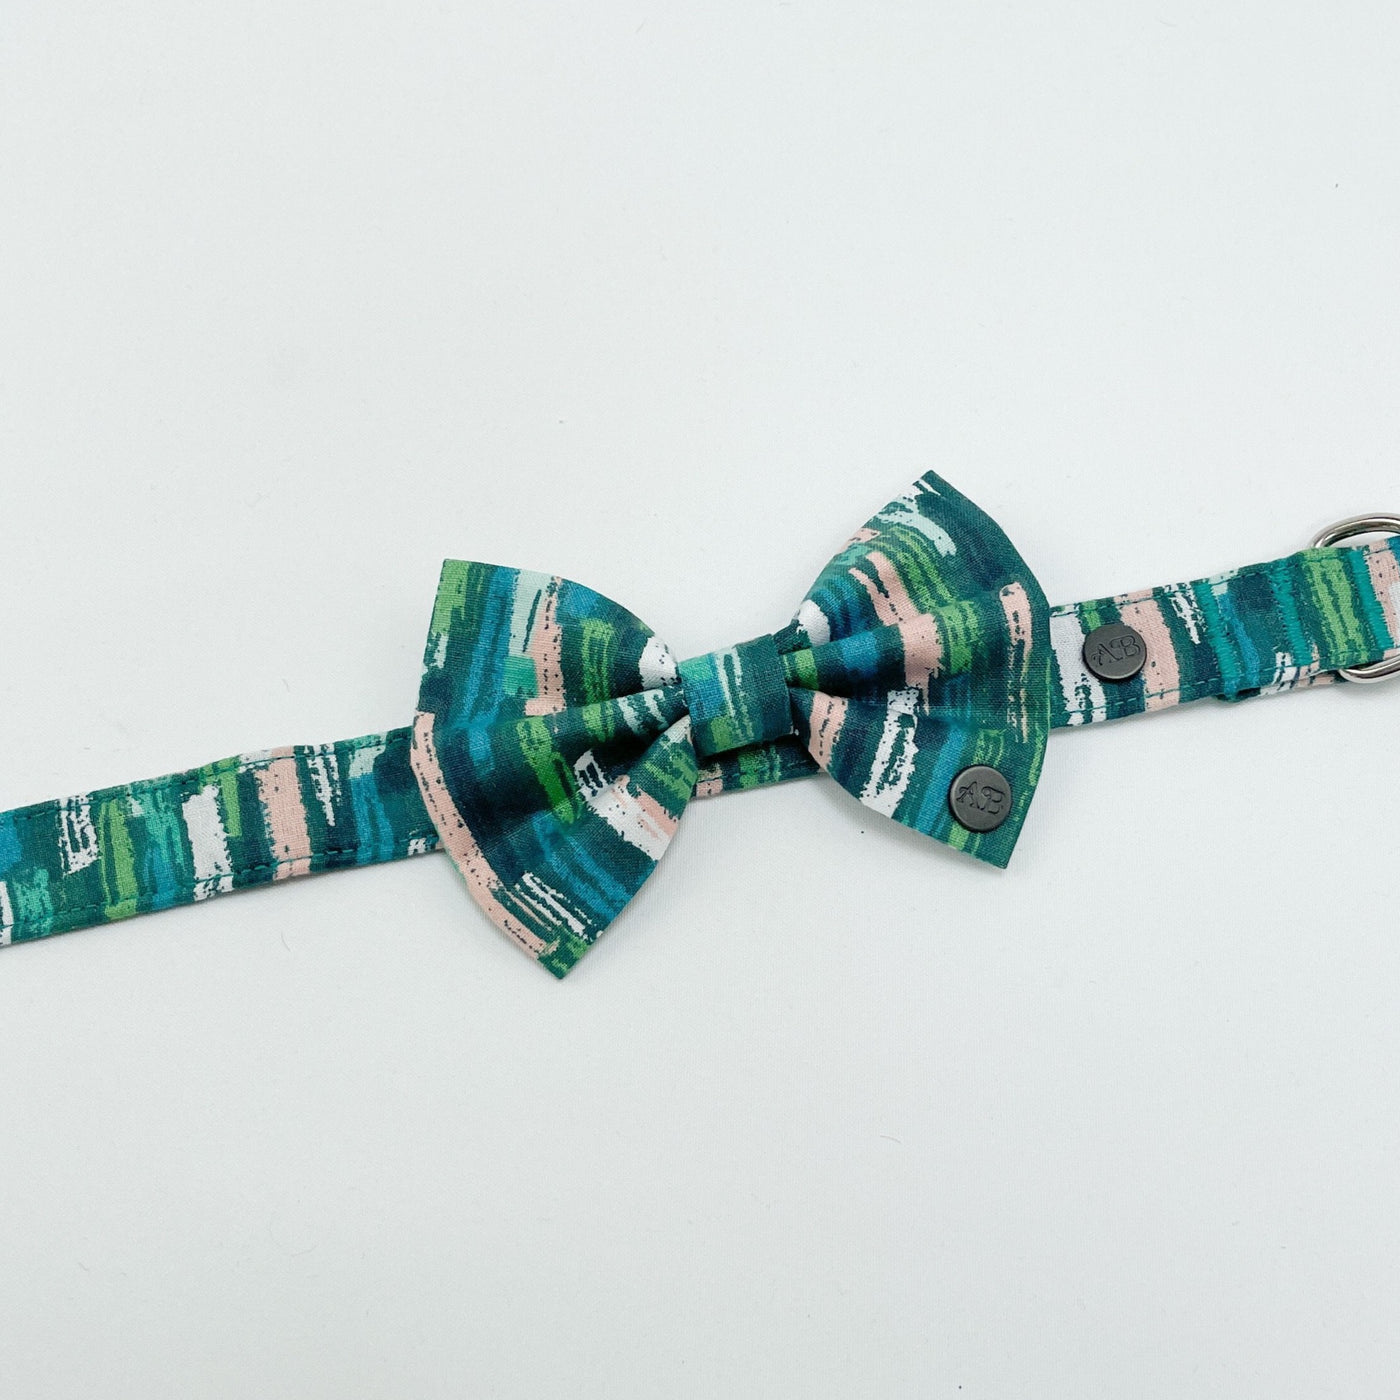 Autumn Stripe Dog Bow Tie attached to matching collar.